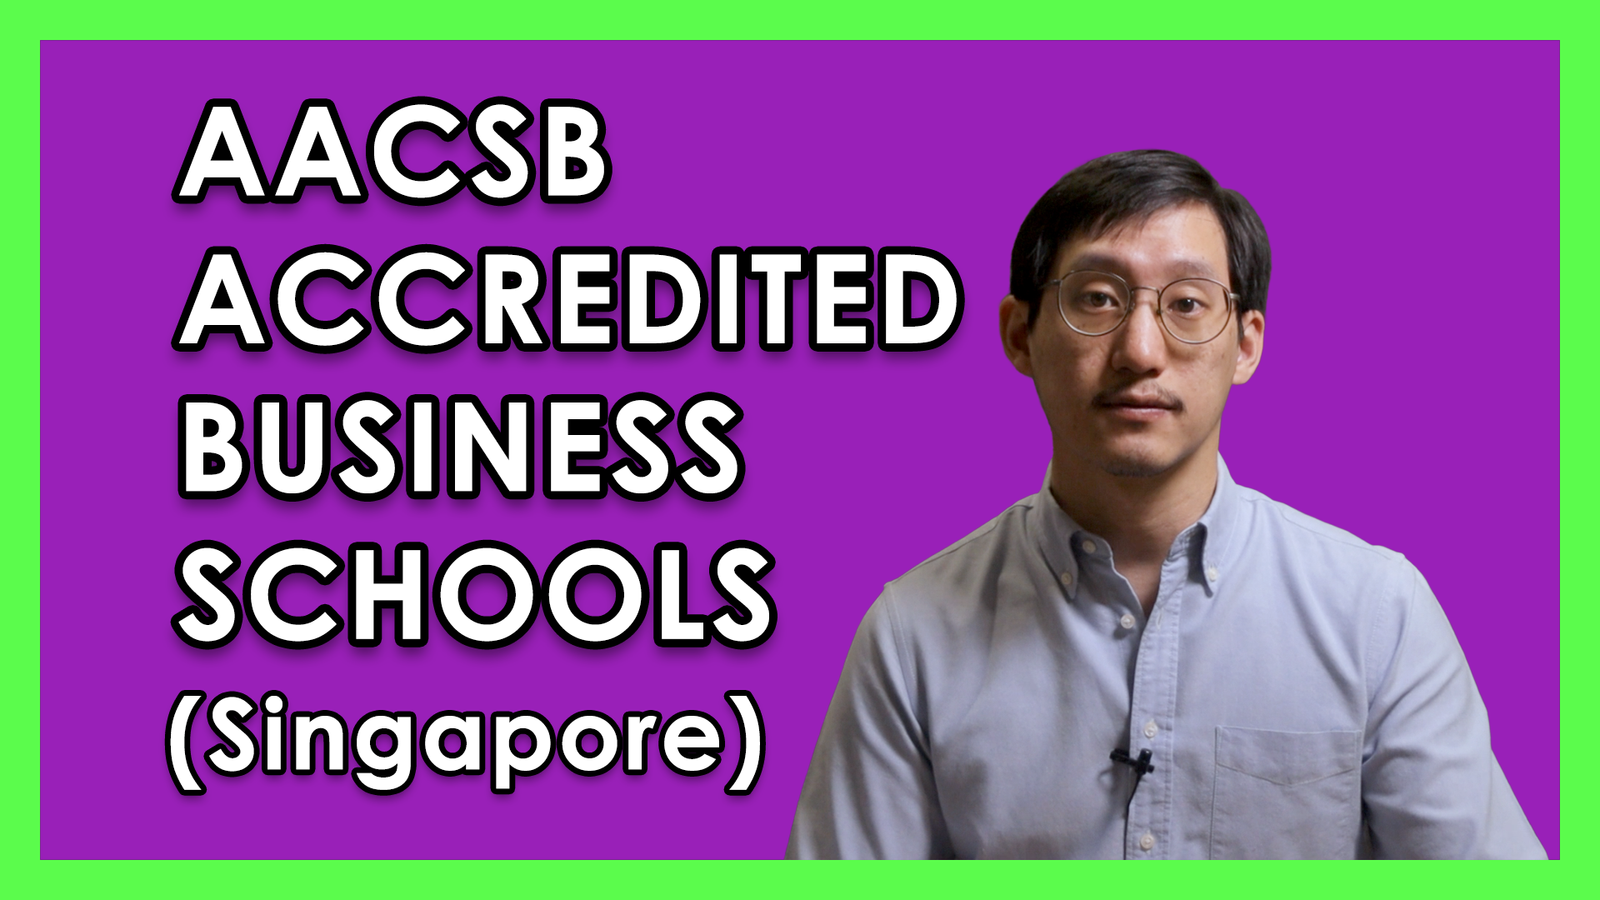 Revealing The Only 4 AACSB Accredited Schools in Singapore | AACSB Accreditation 2021